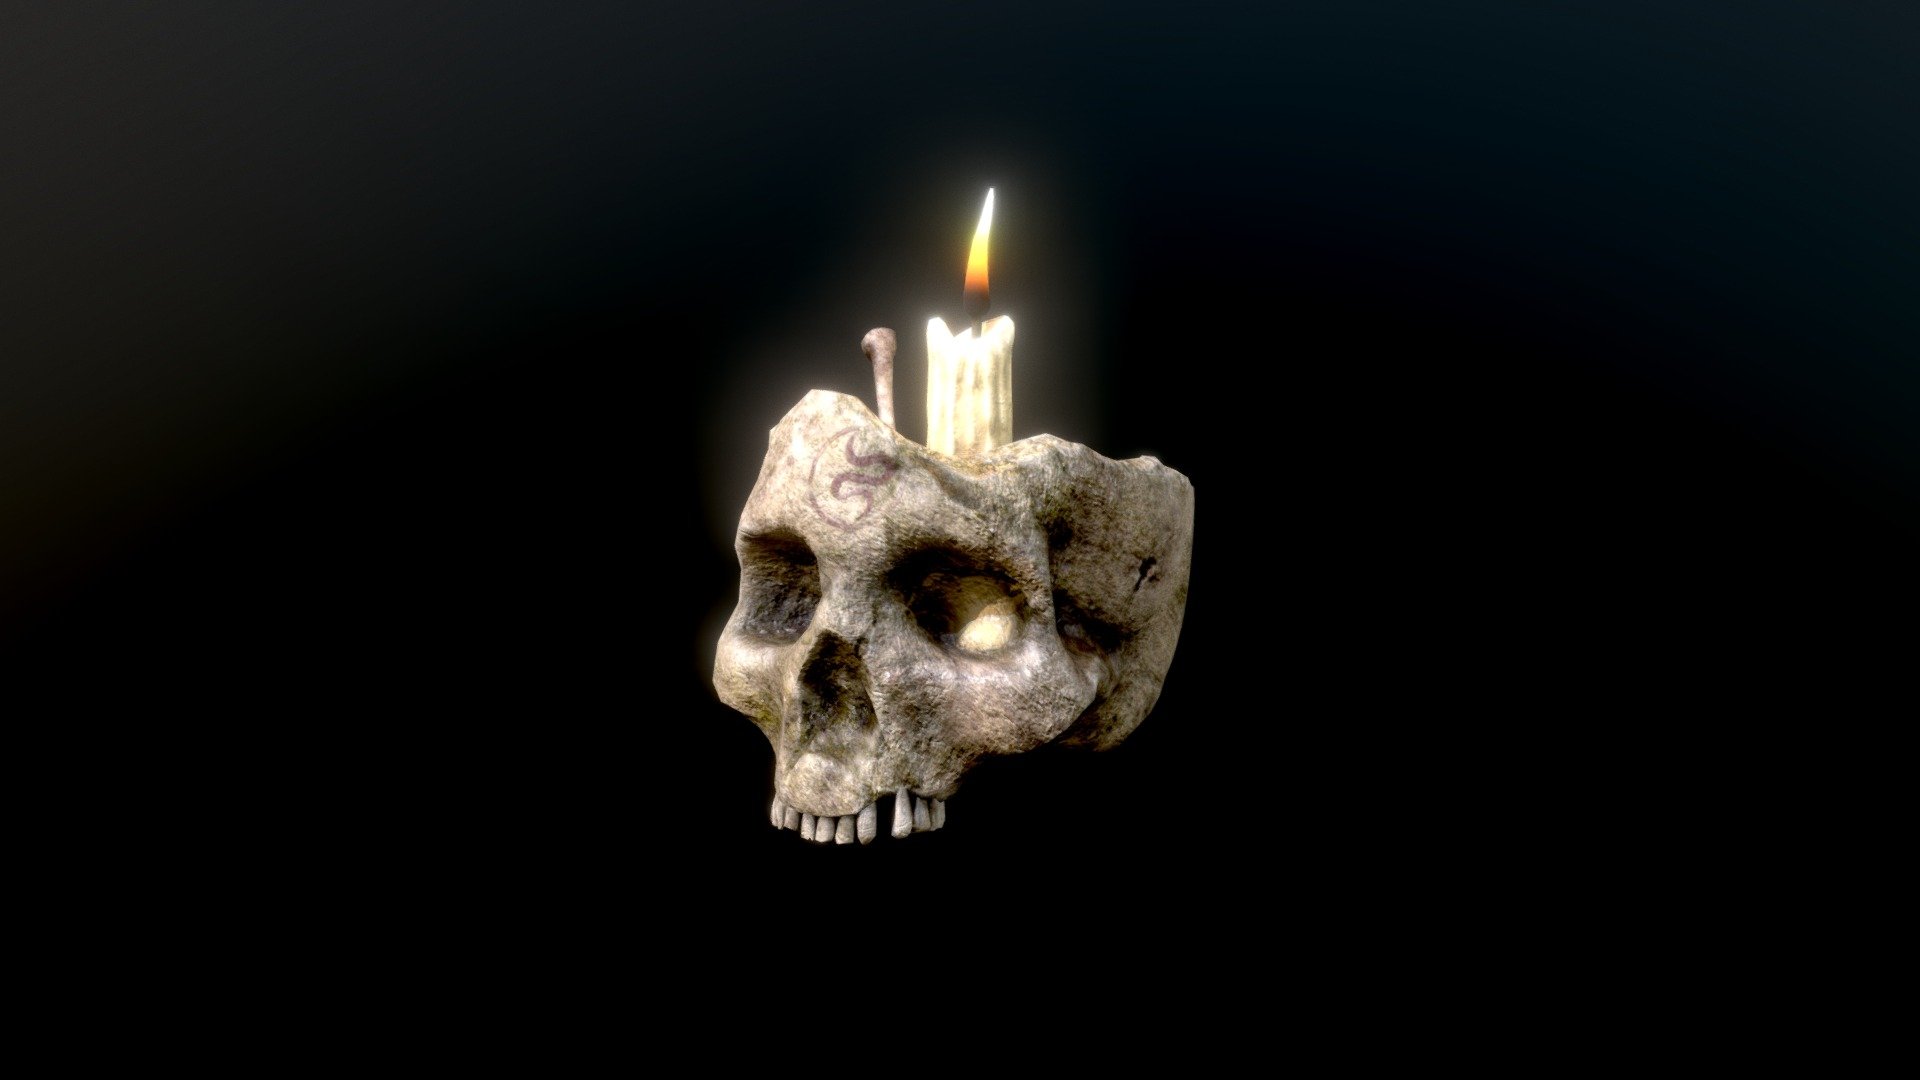 HIE Skull Candle D180309